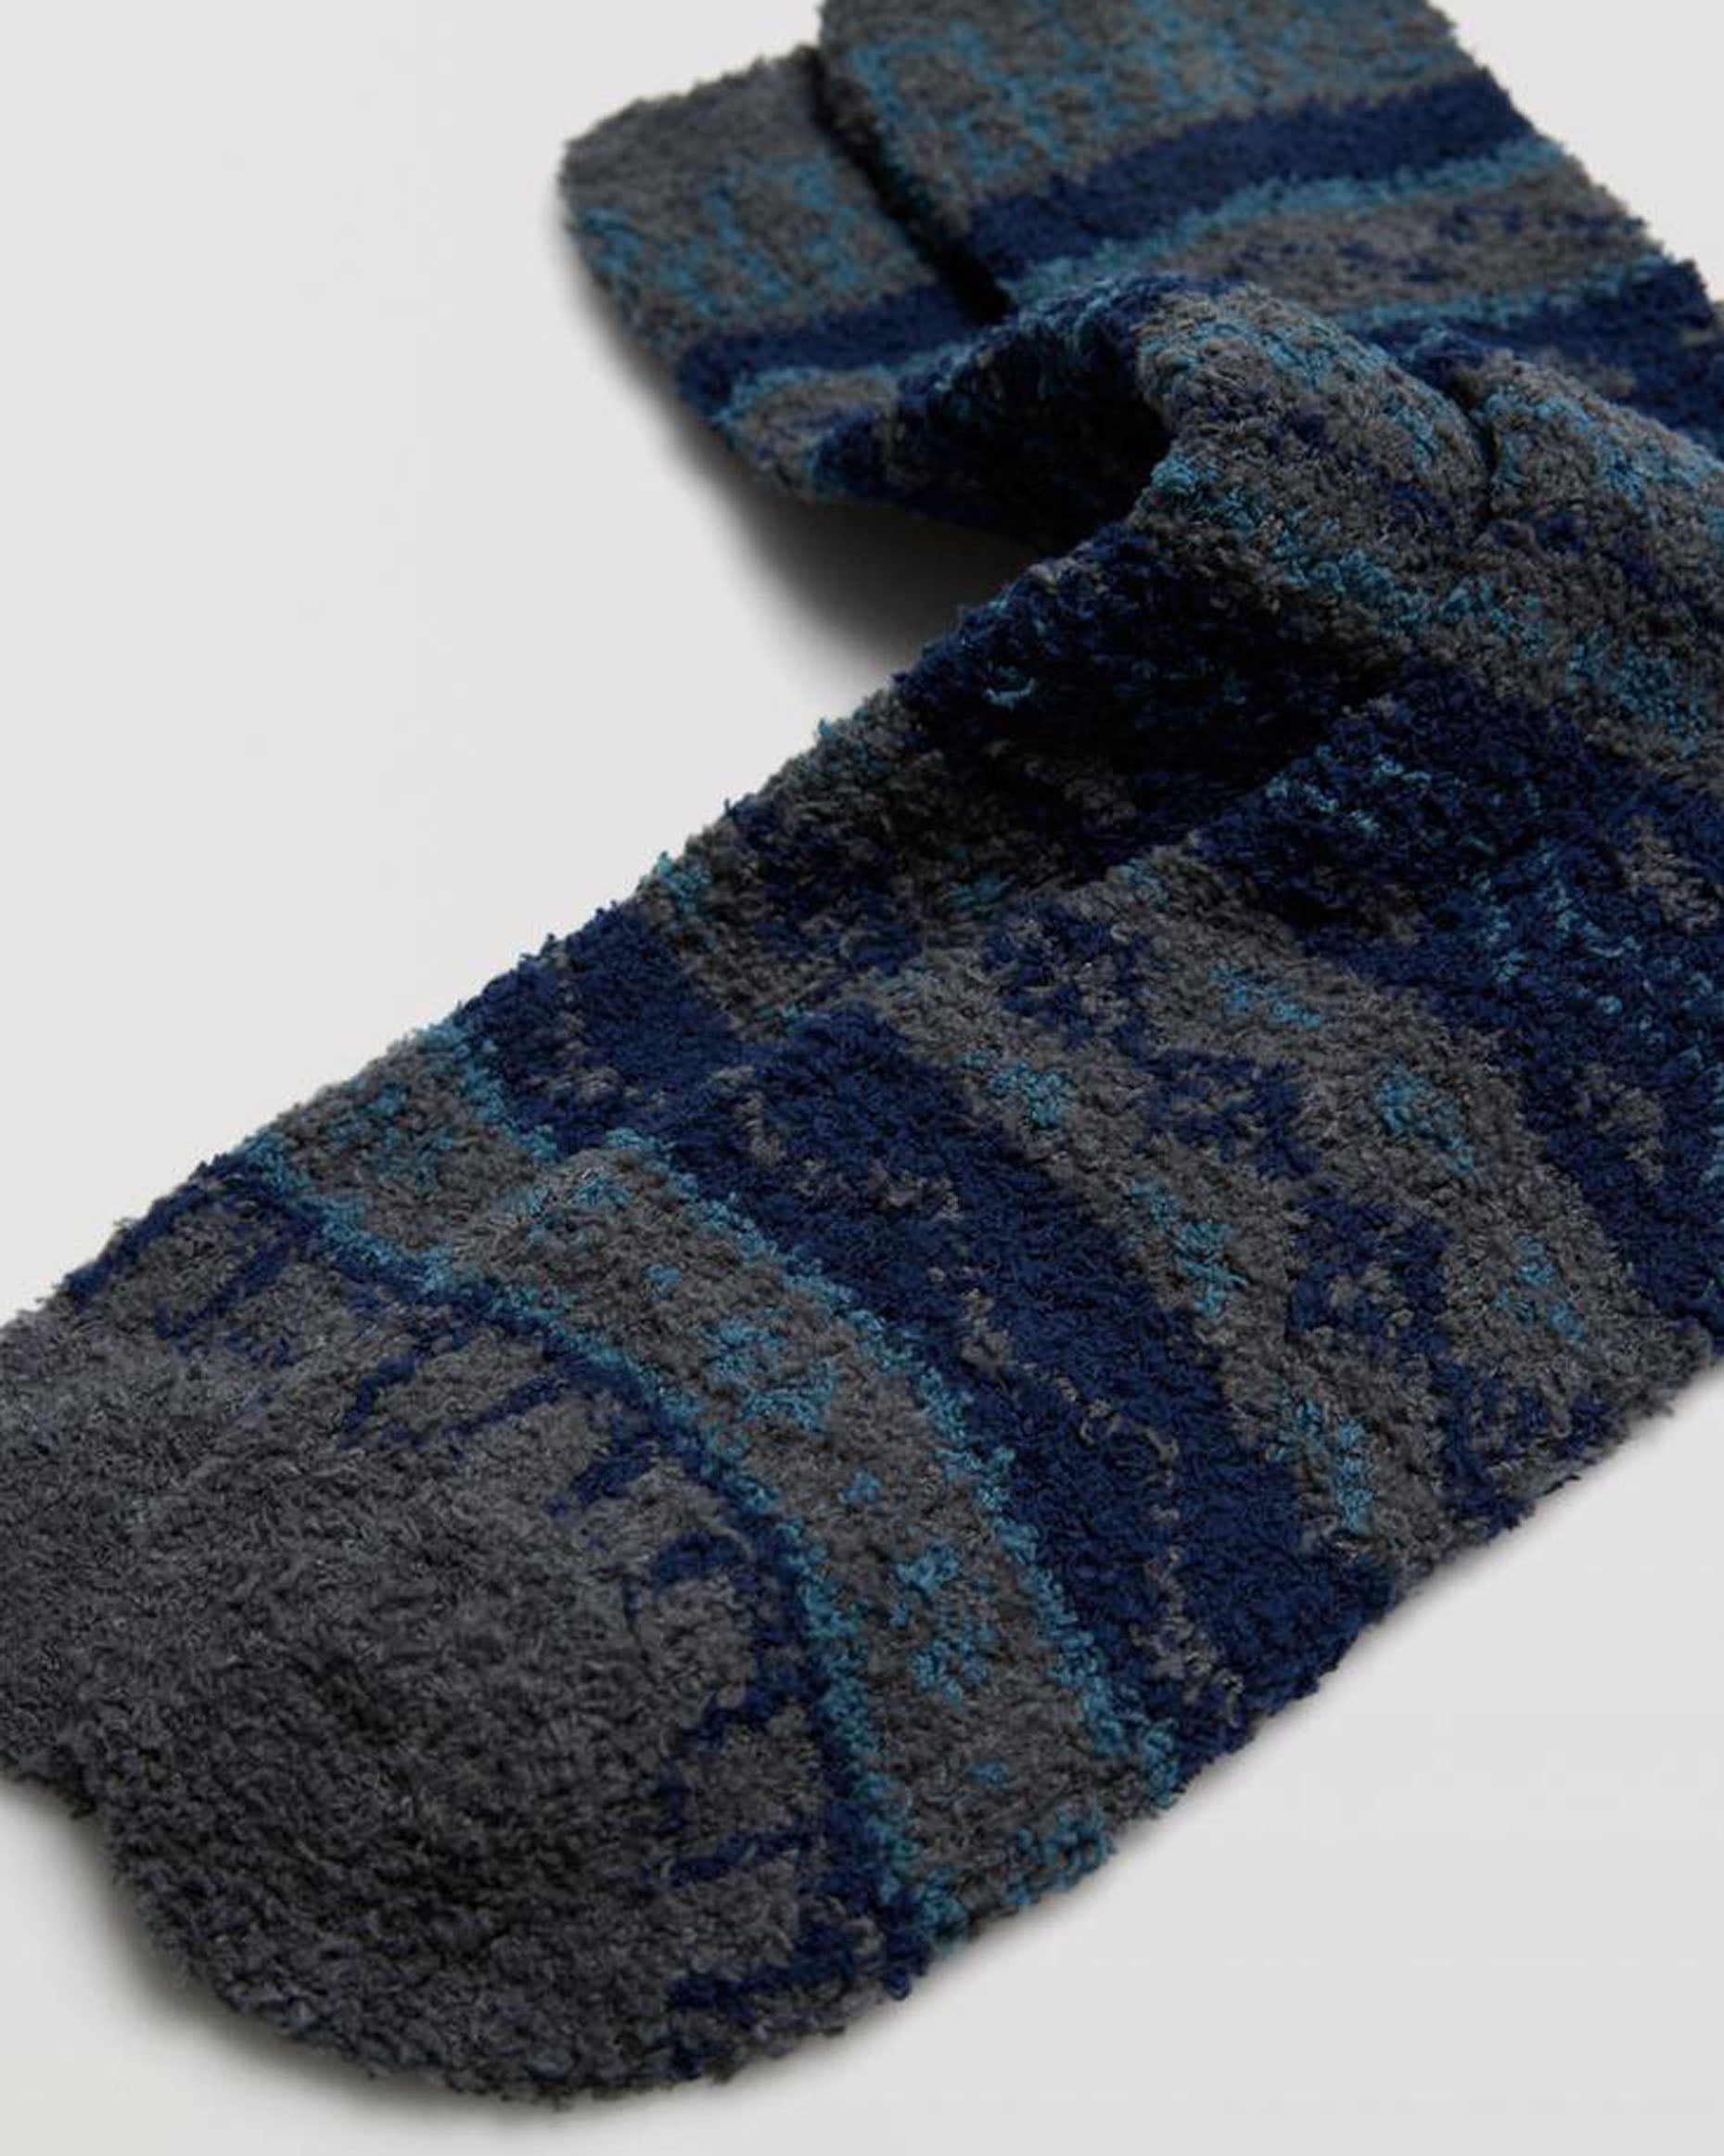 Soft, fluffy and warm patterned socks in shades of grey and blue